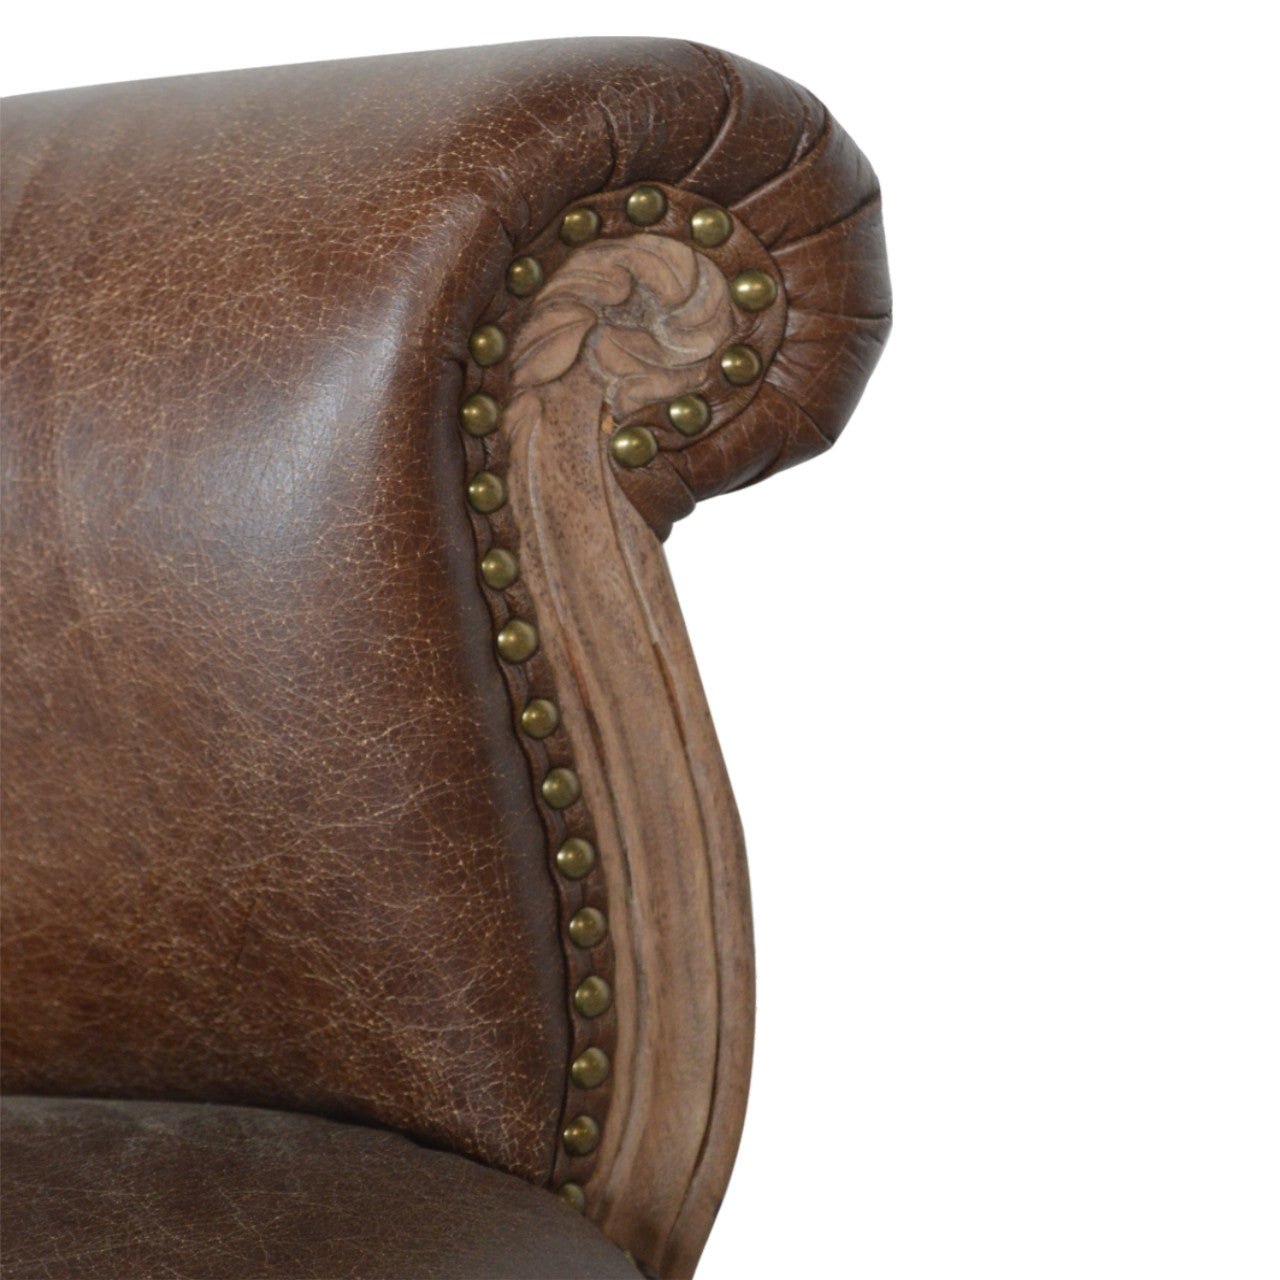 Buffalo Hide Studded Chair with Cabriole Legs - mancavesuperstore